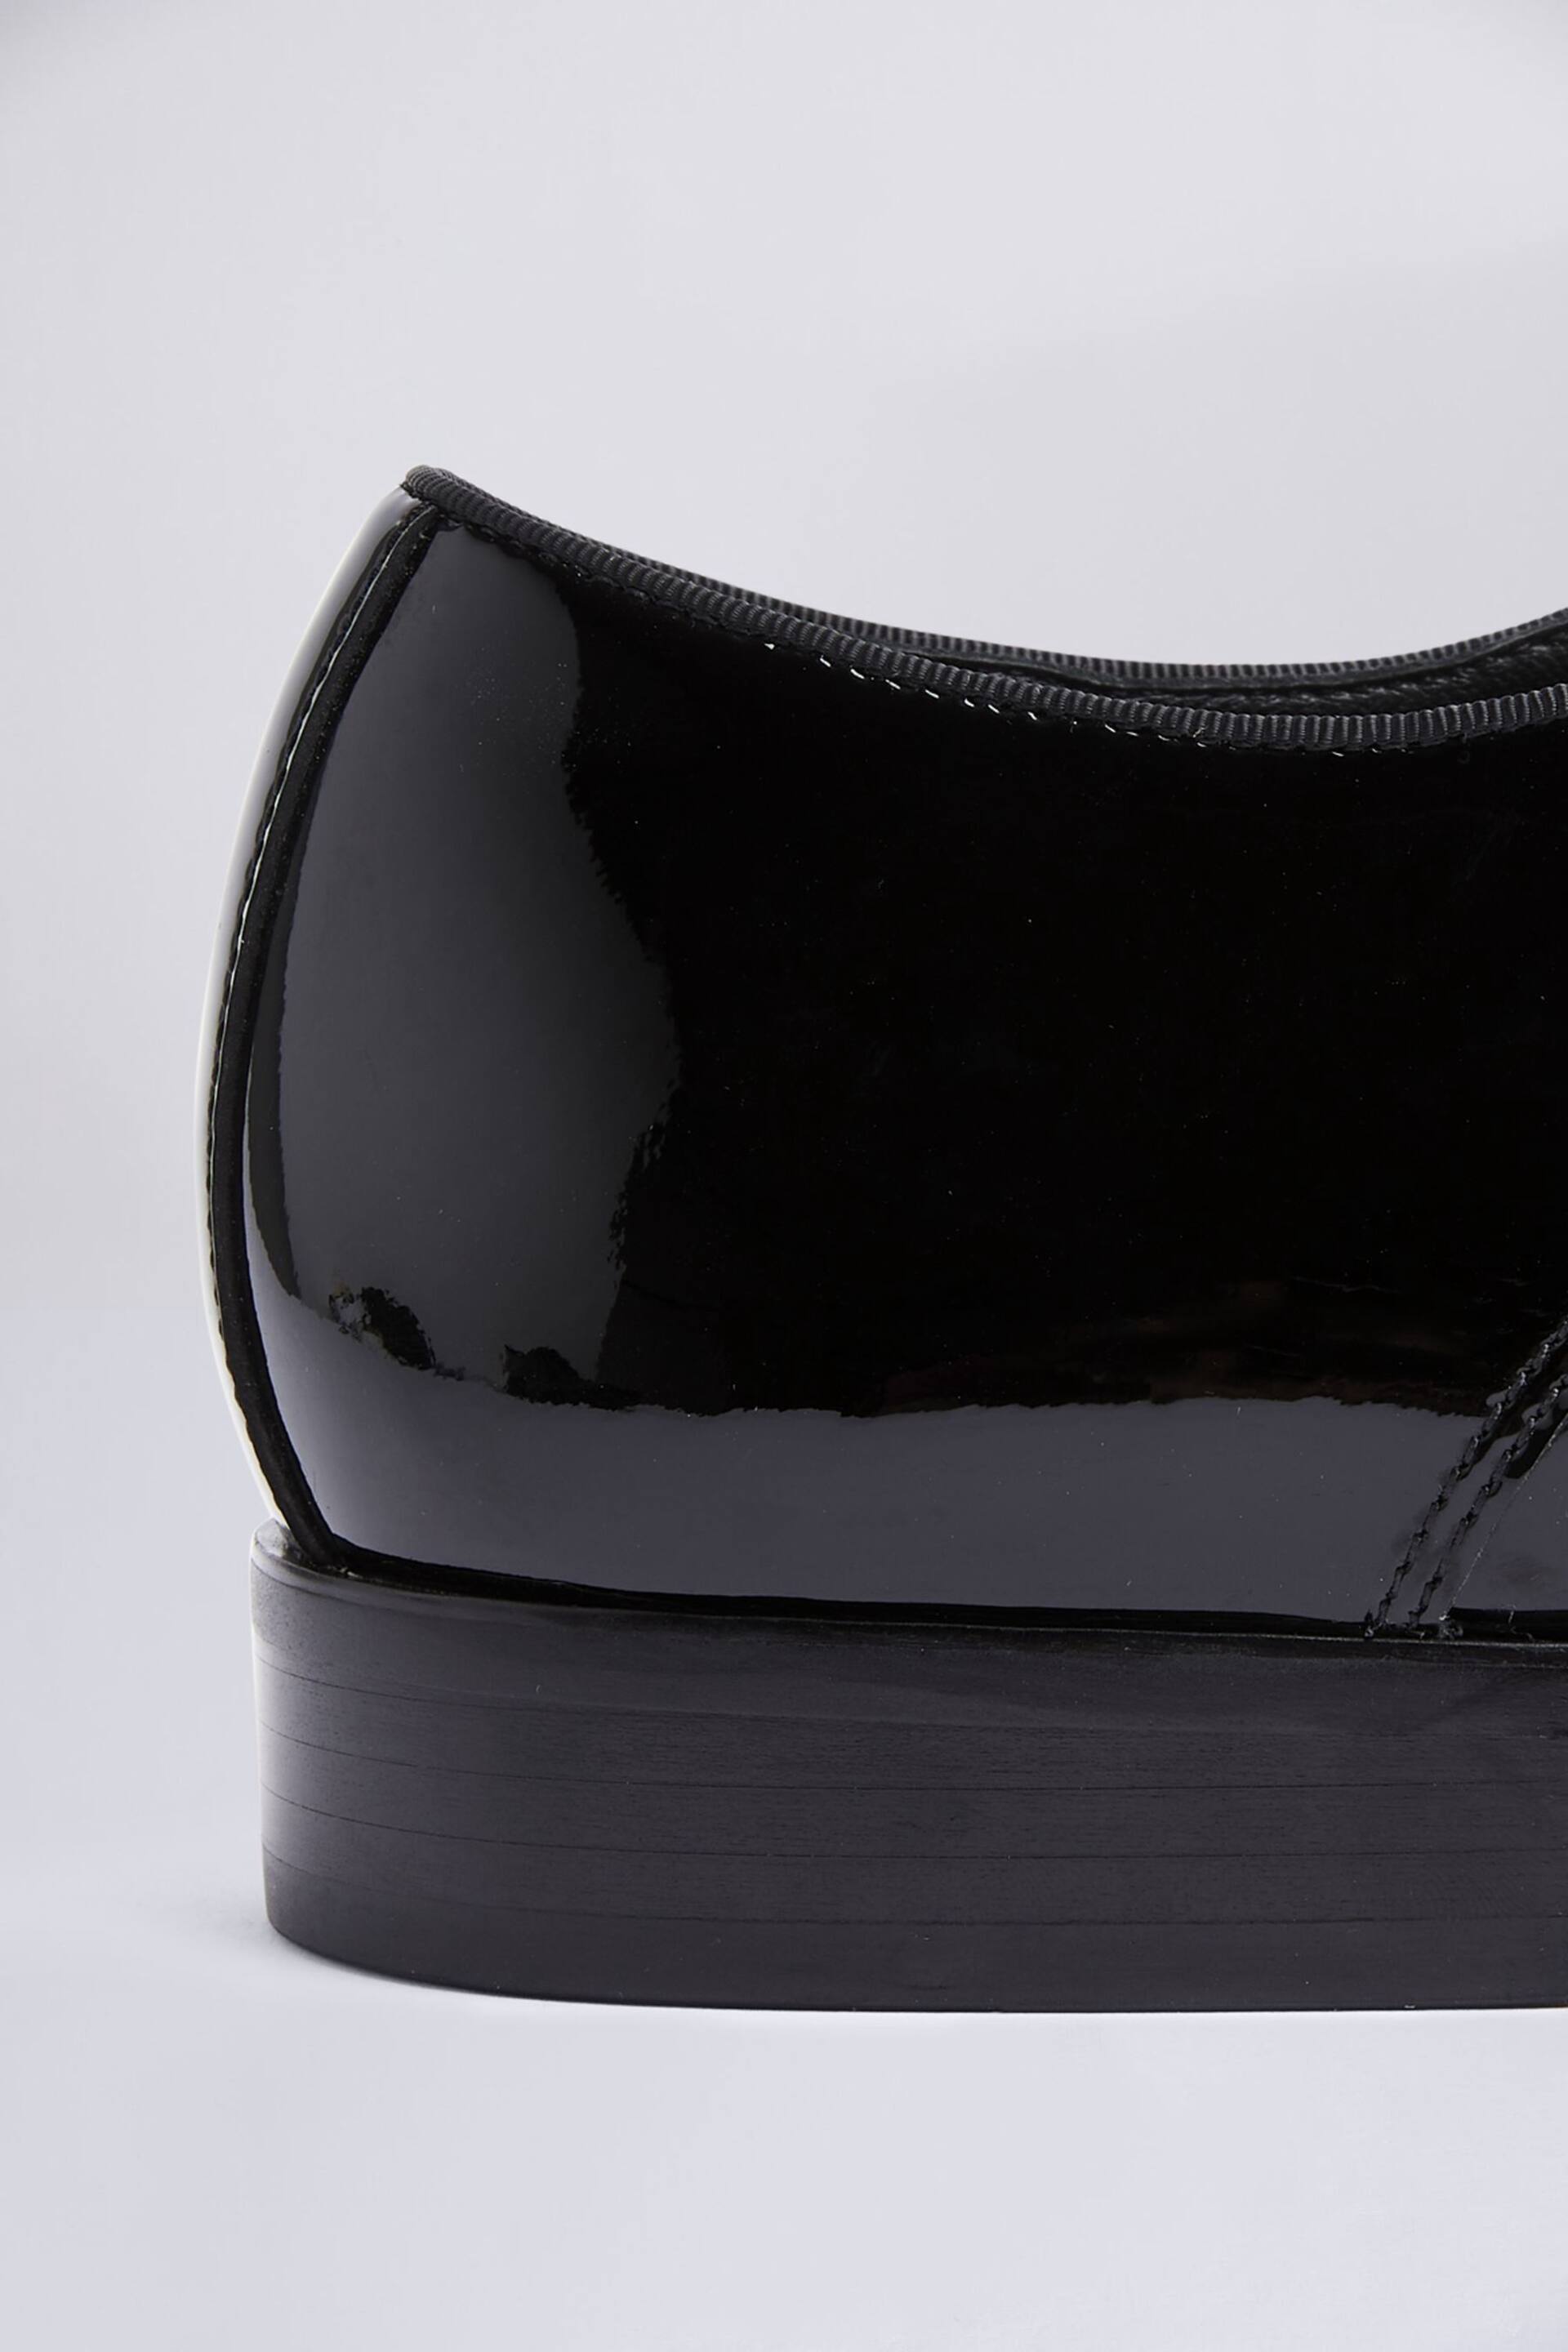 MOSS Ivy Black Patent Dress Shoes - Image 3 of 3